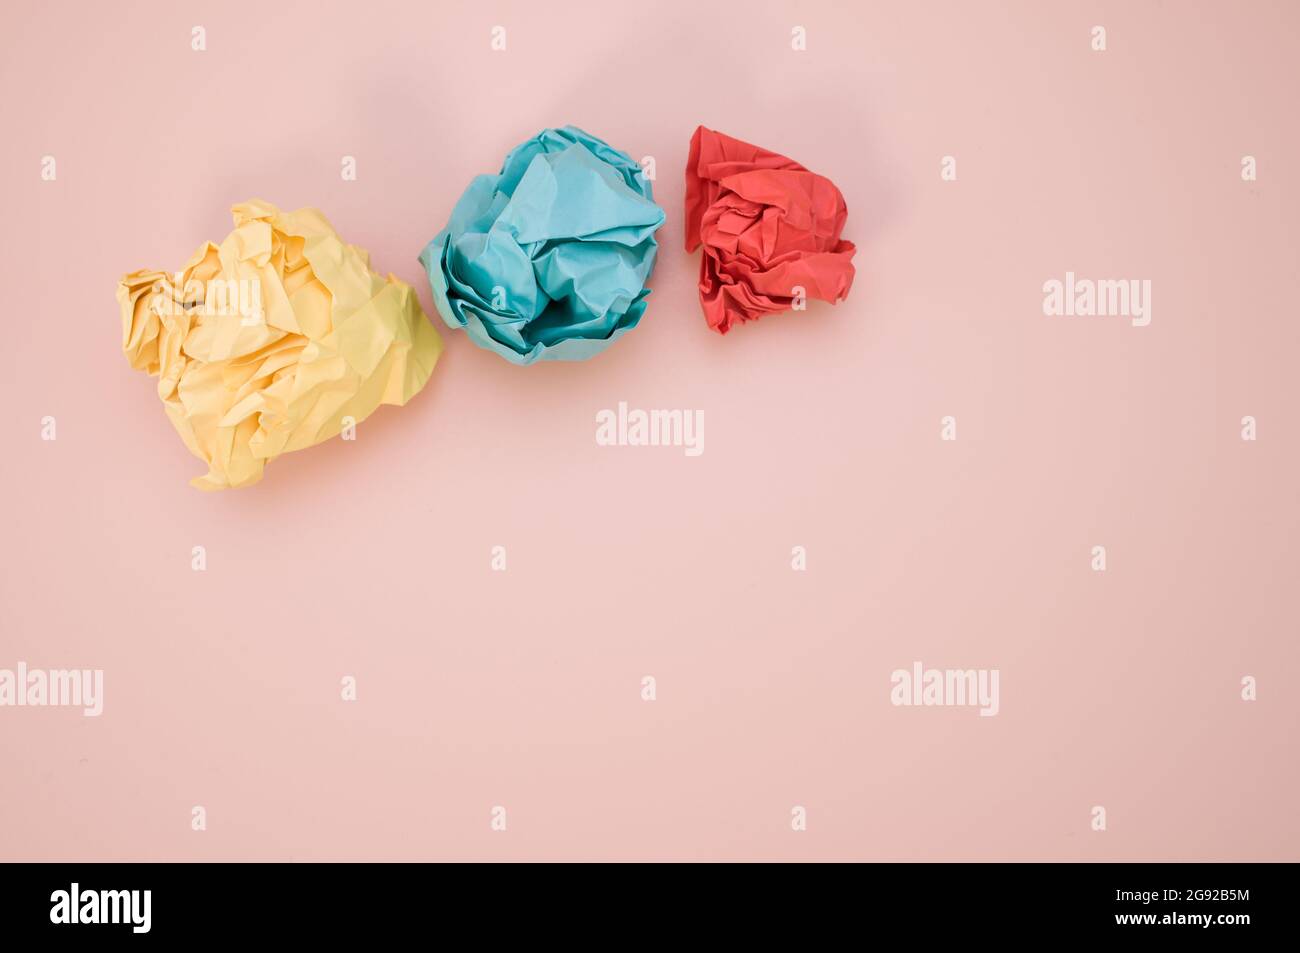 Closeup shot of aligned crumpled colored paper isolated on a pink background with copyspace Stock Photo